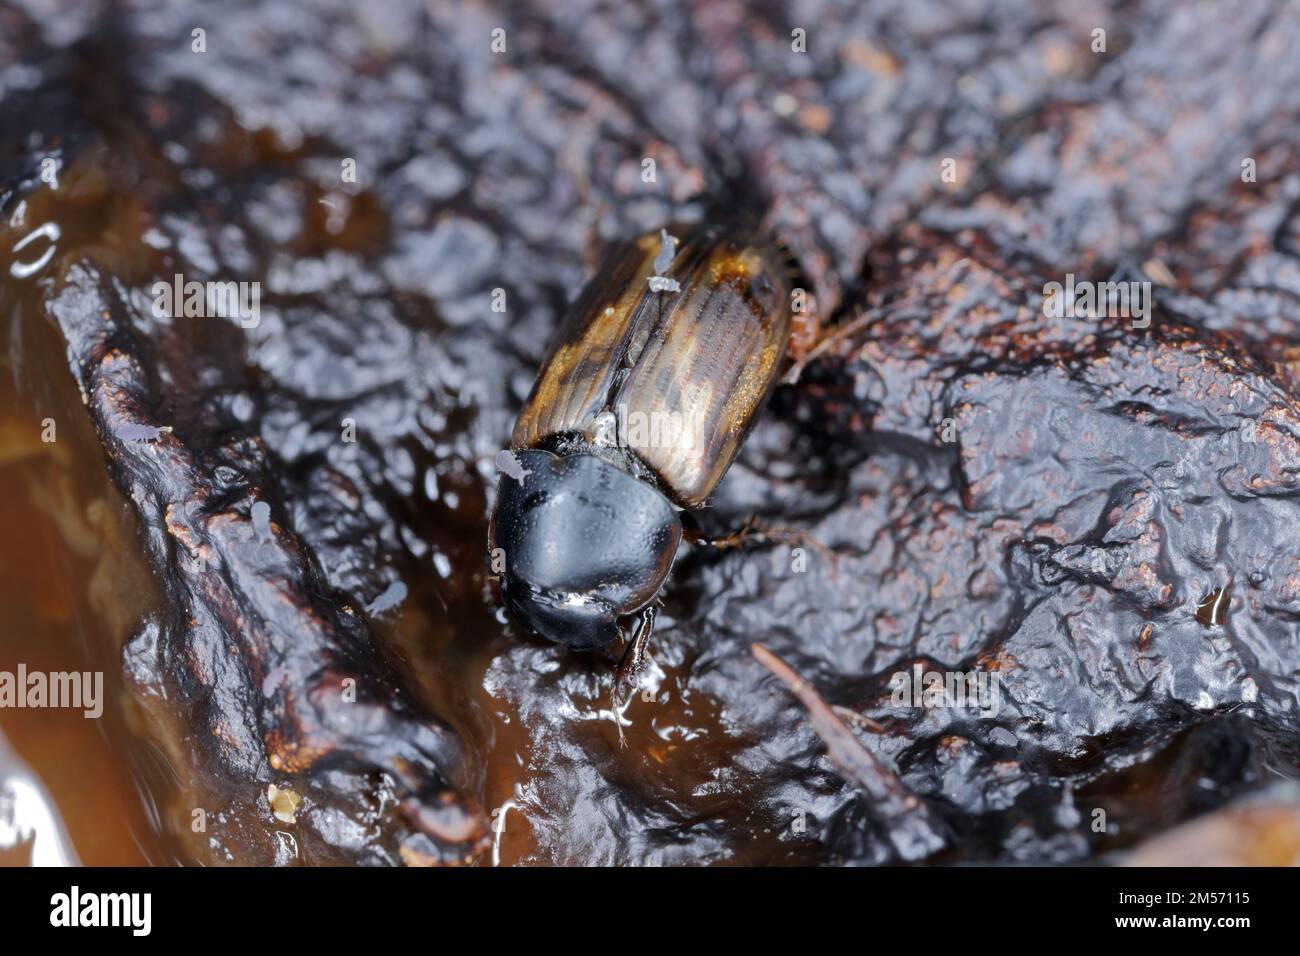 Aphodius erraticus dung beetle. Insect in the family Scarabaeidae, commonly found in cow pats. Stock Photo